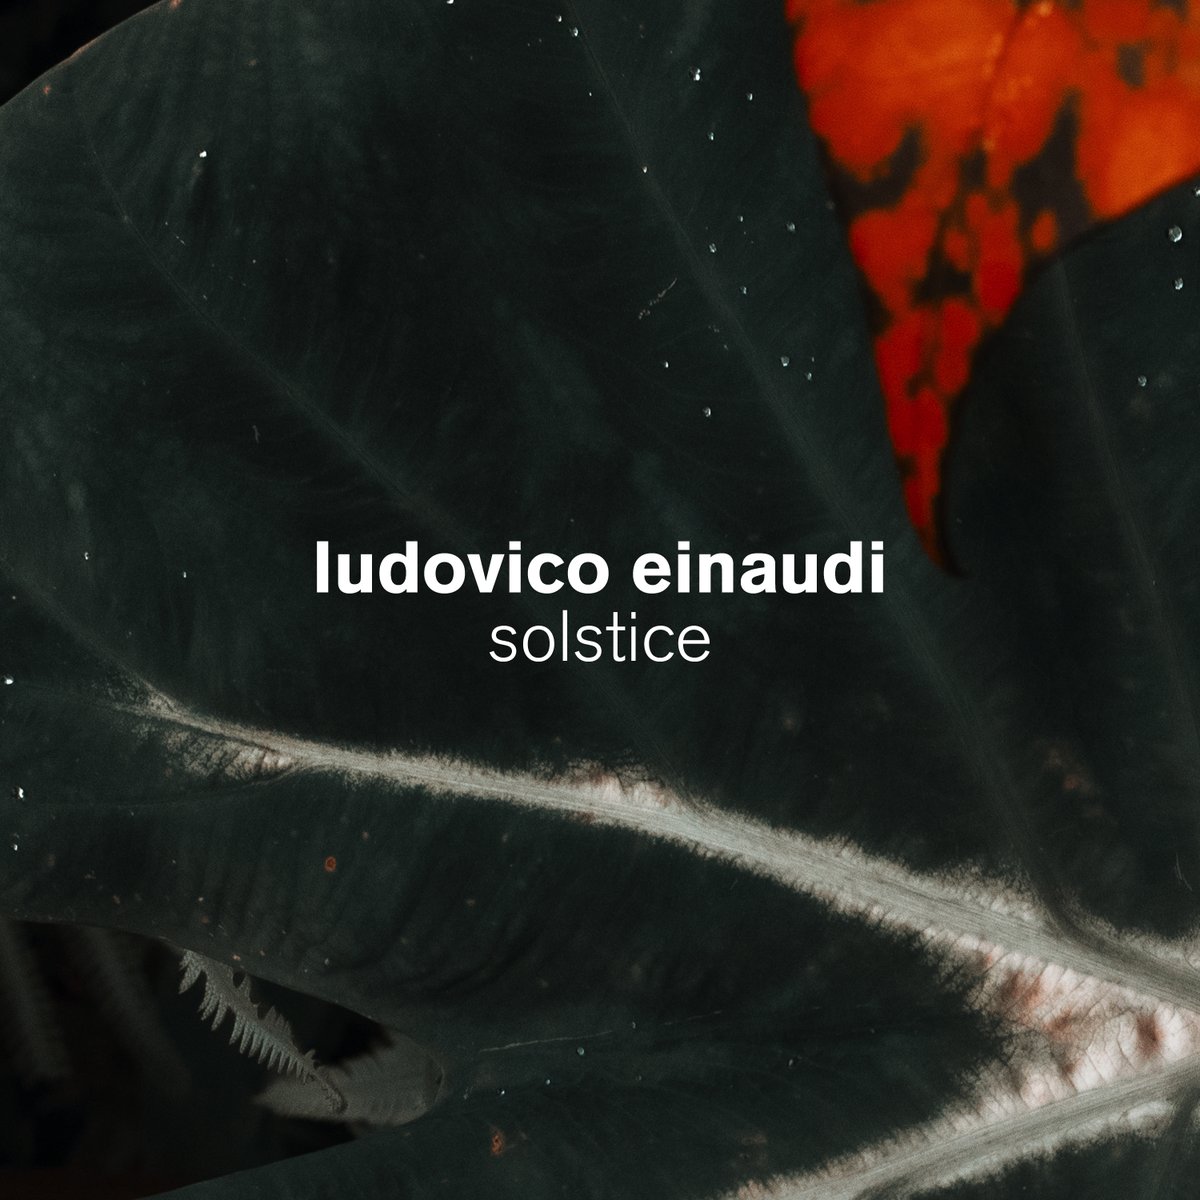 For the longest day of sun: ‘Solstice’, a hand-picked collection of some tracks for the summertime, is out now. Listen to it at Einaudi.lnk.to/solsticeSo Cover by Jack Davison #solstice #ludovicoeinaudi